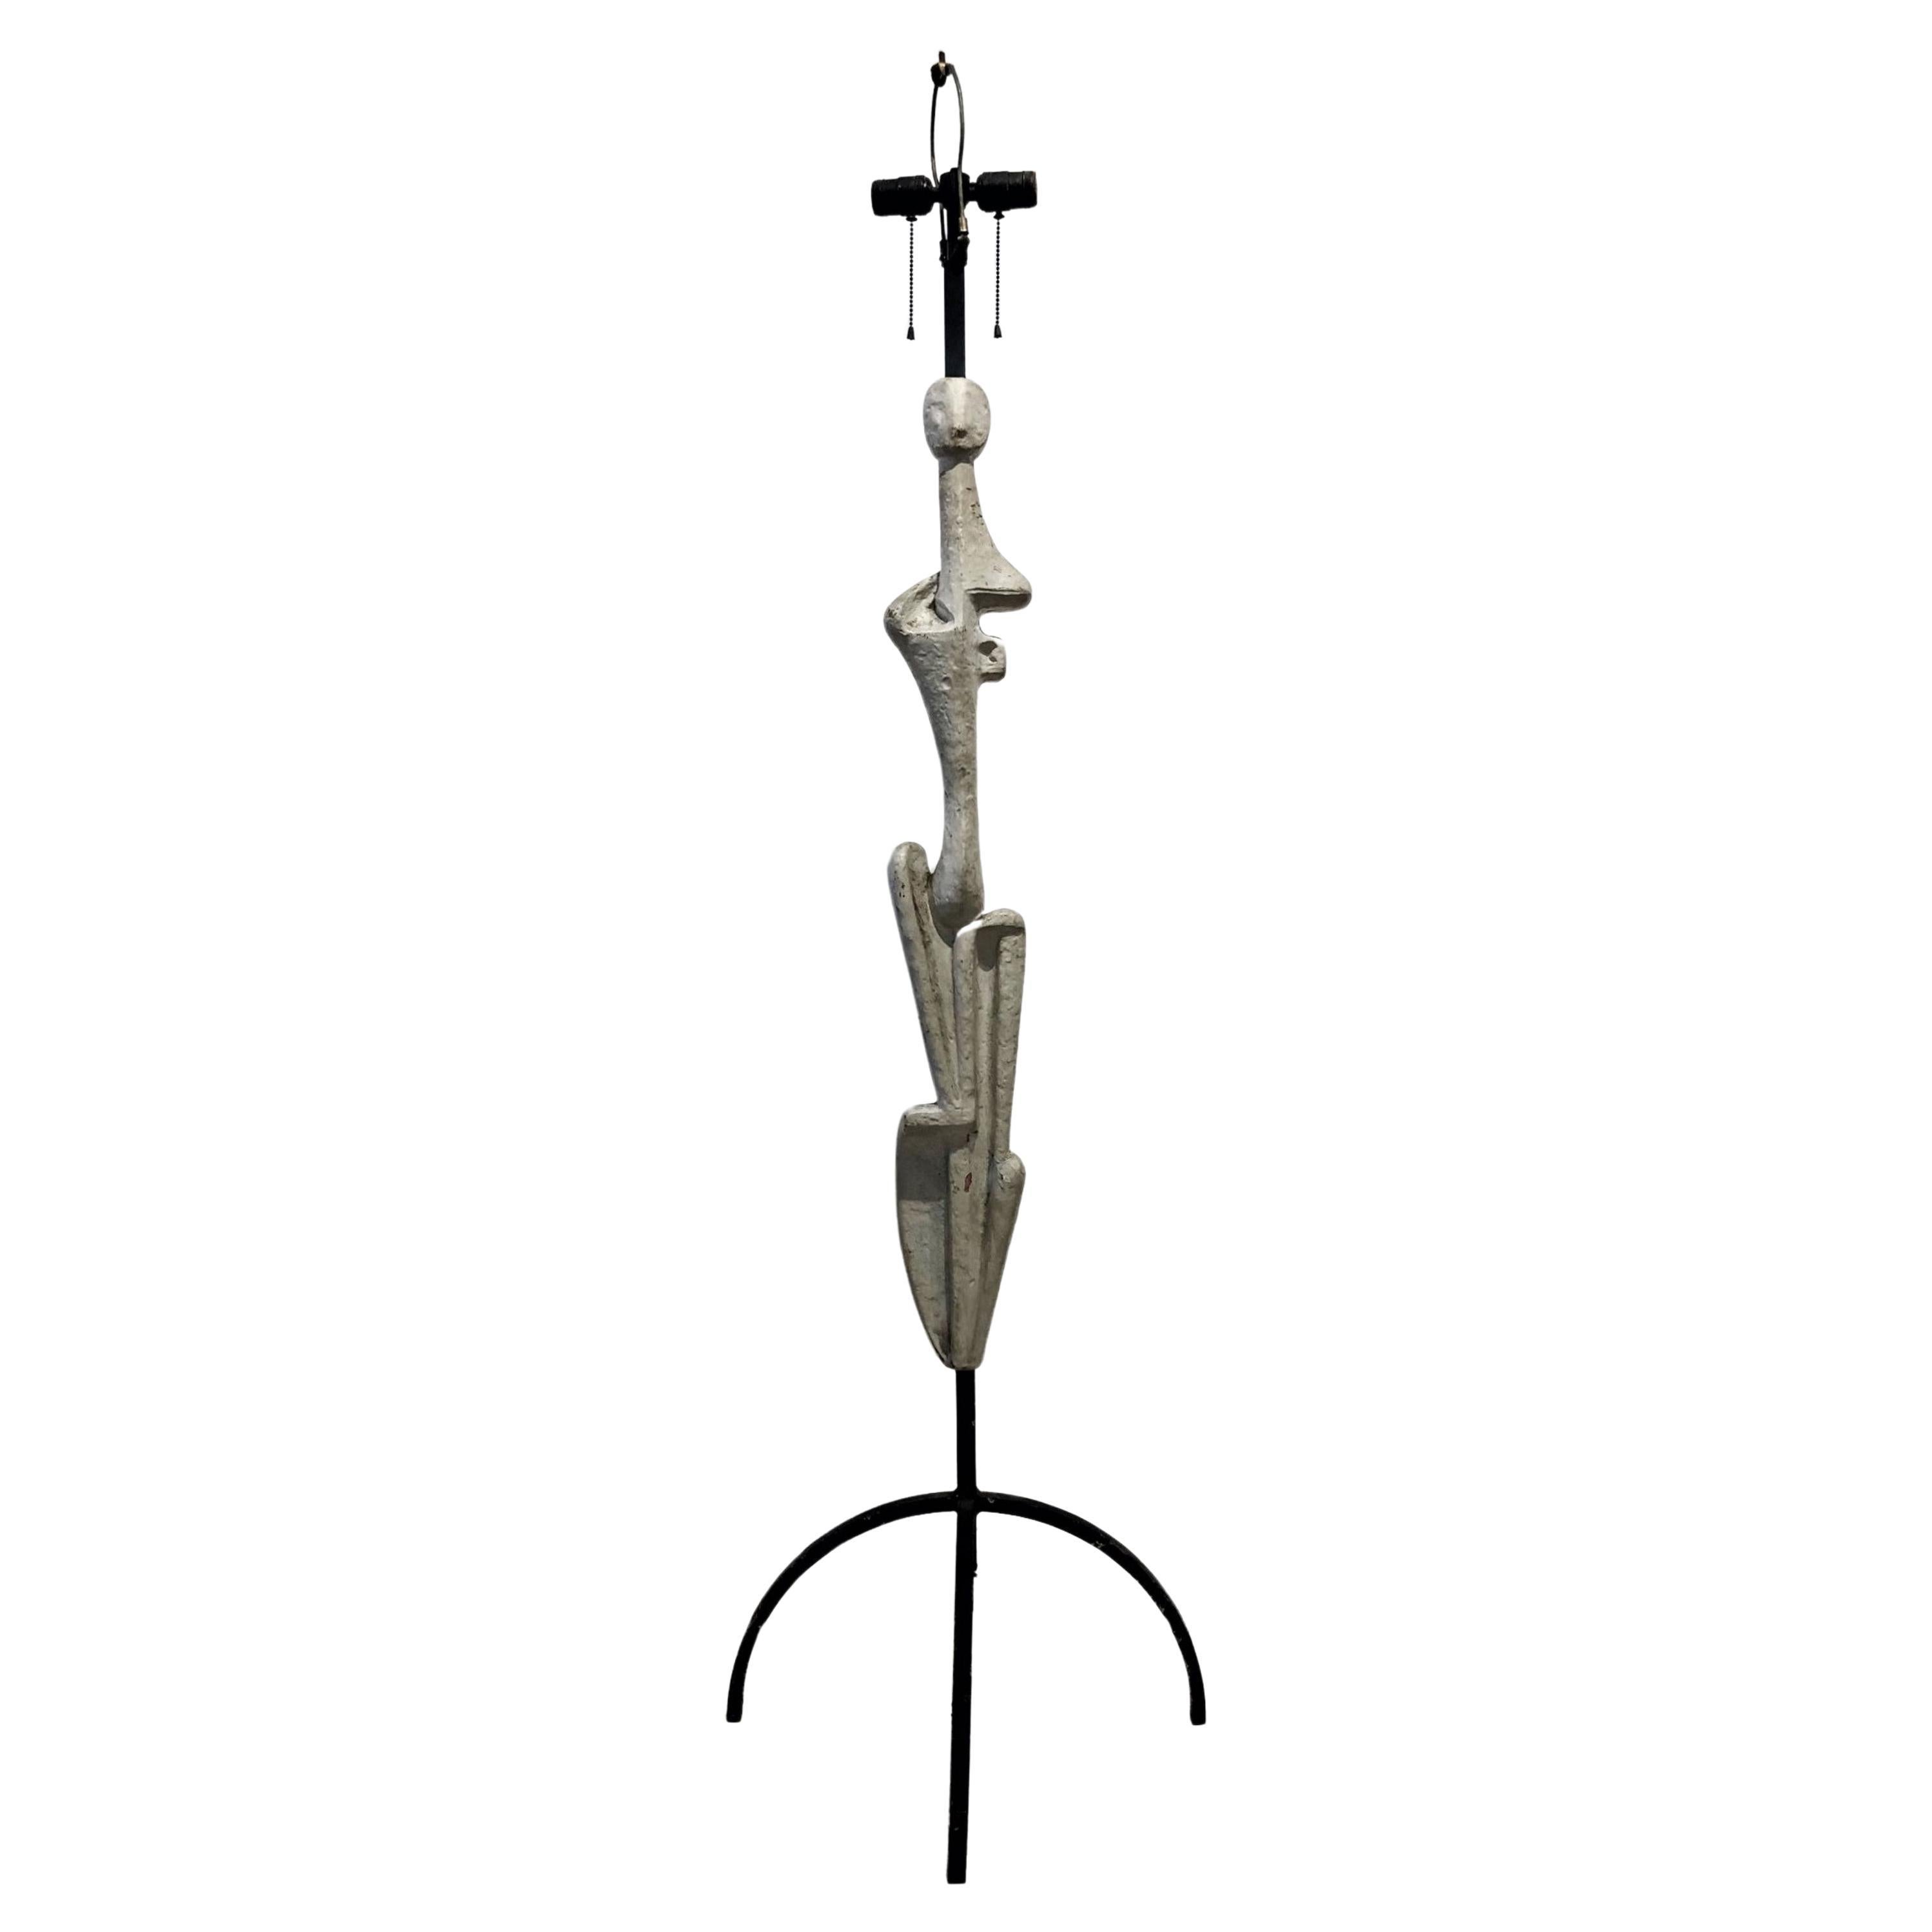 Modernist Floor Lamp in Alberto Giacometti Manner, Late XX Century For Sale